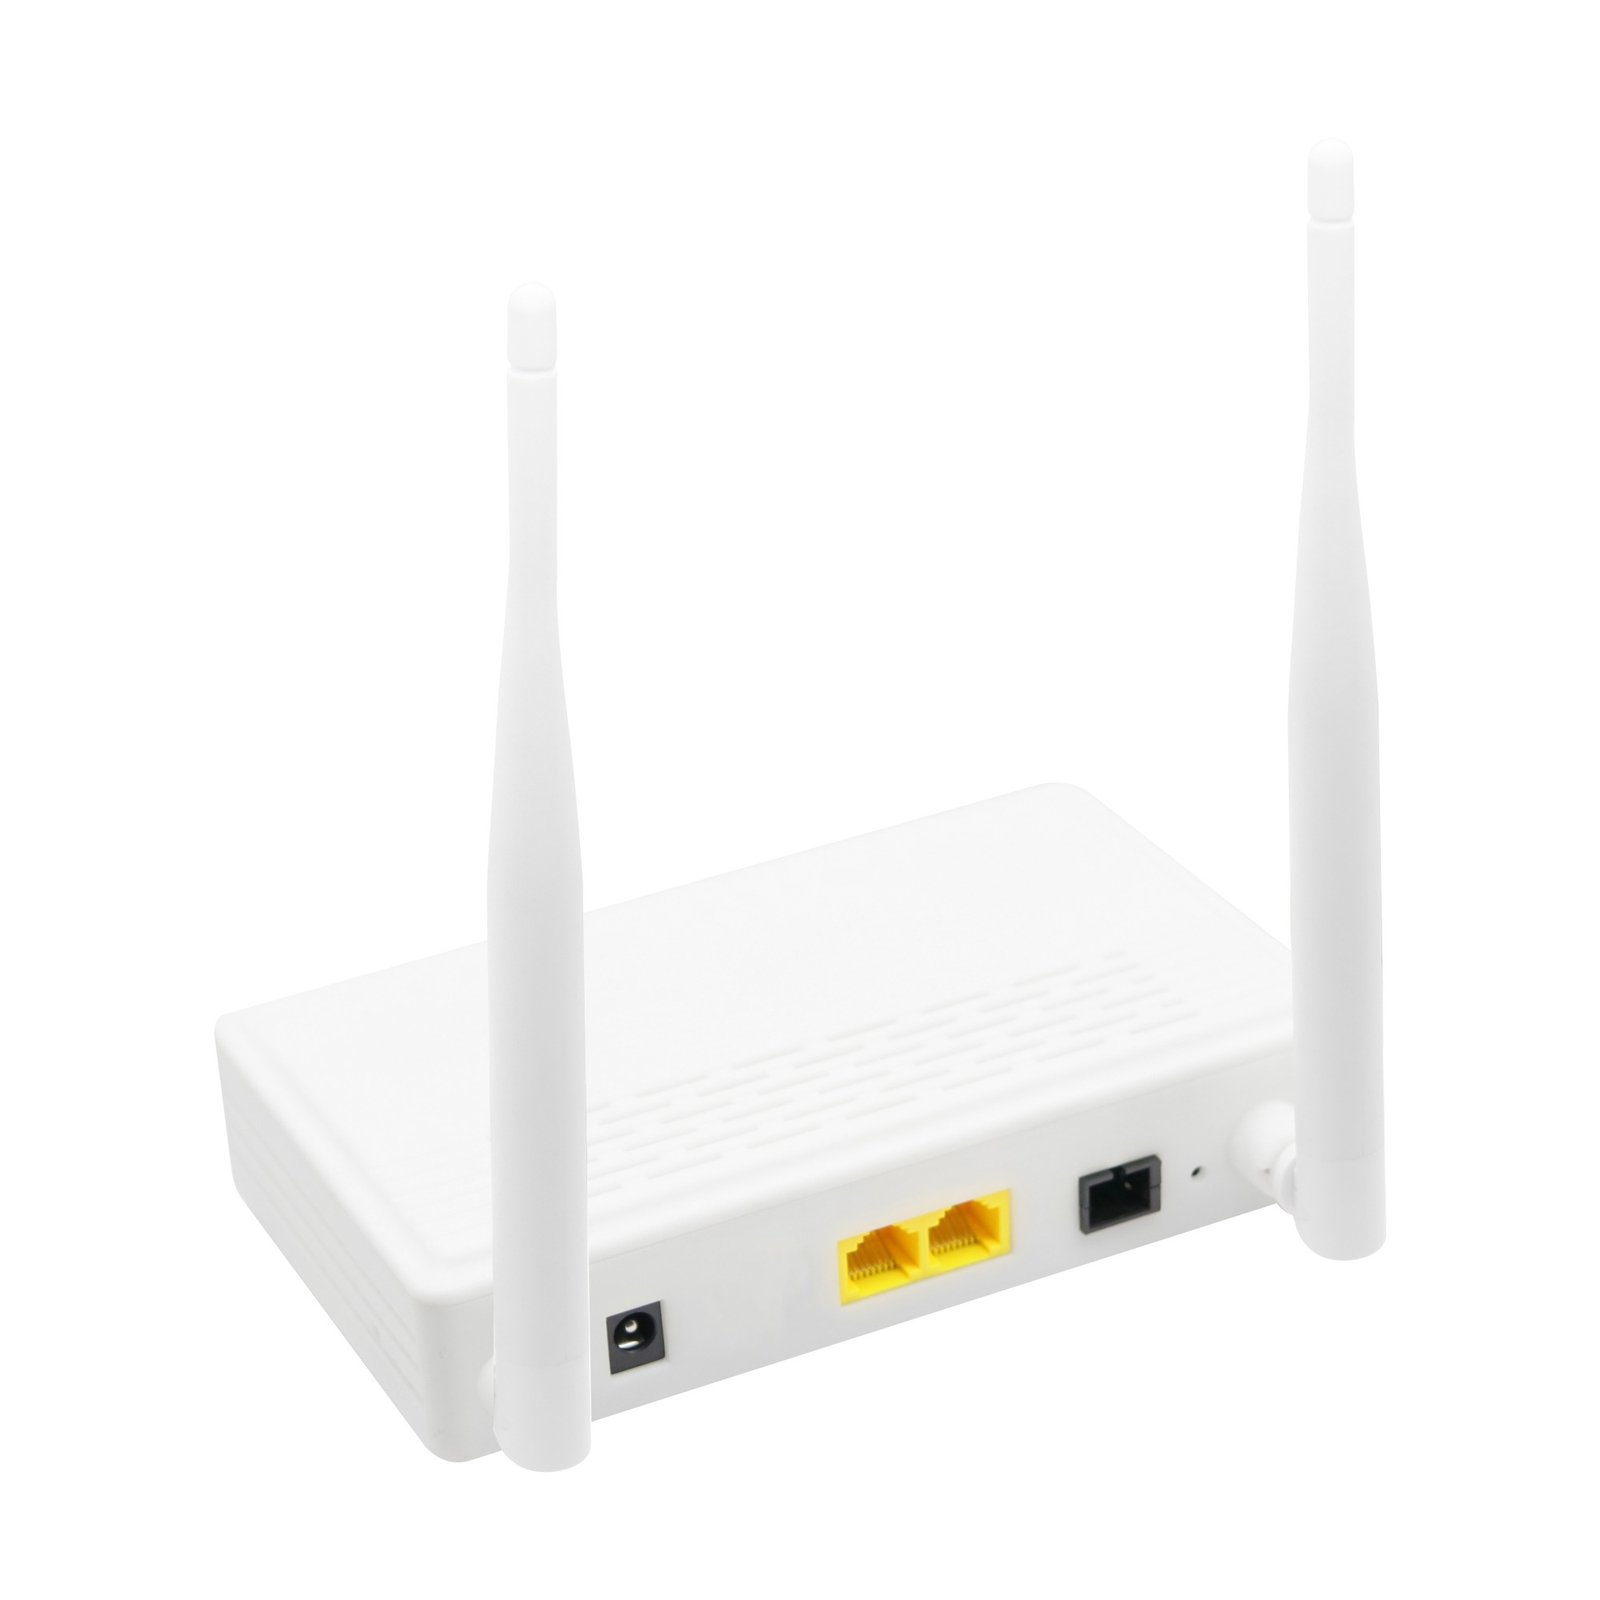 China Supplier Internet Repeater - QF-HE101W EPON ONU 1GE+1FE WIFI  EPON ONT – Qualfiber